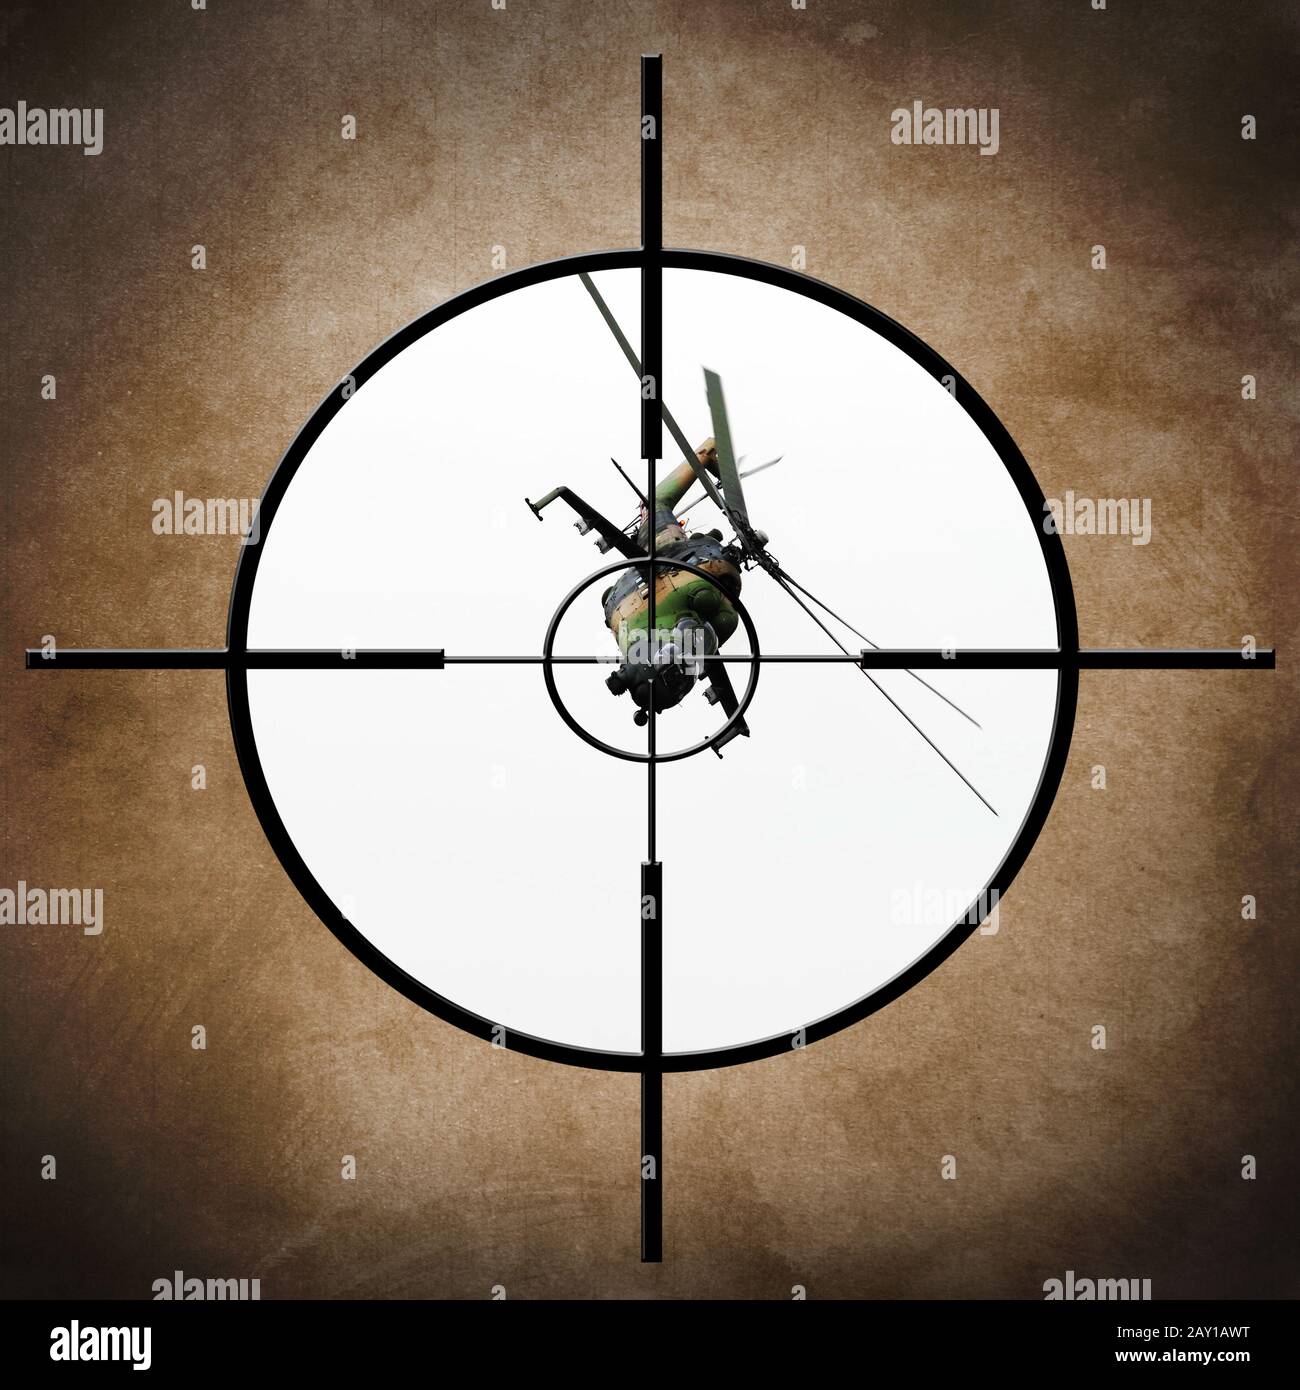 Military target on helicopter Stock Photo